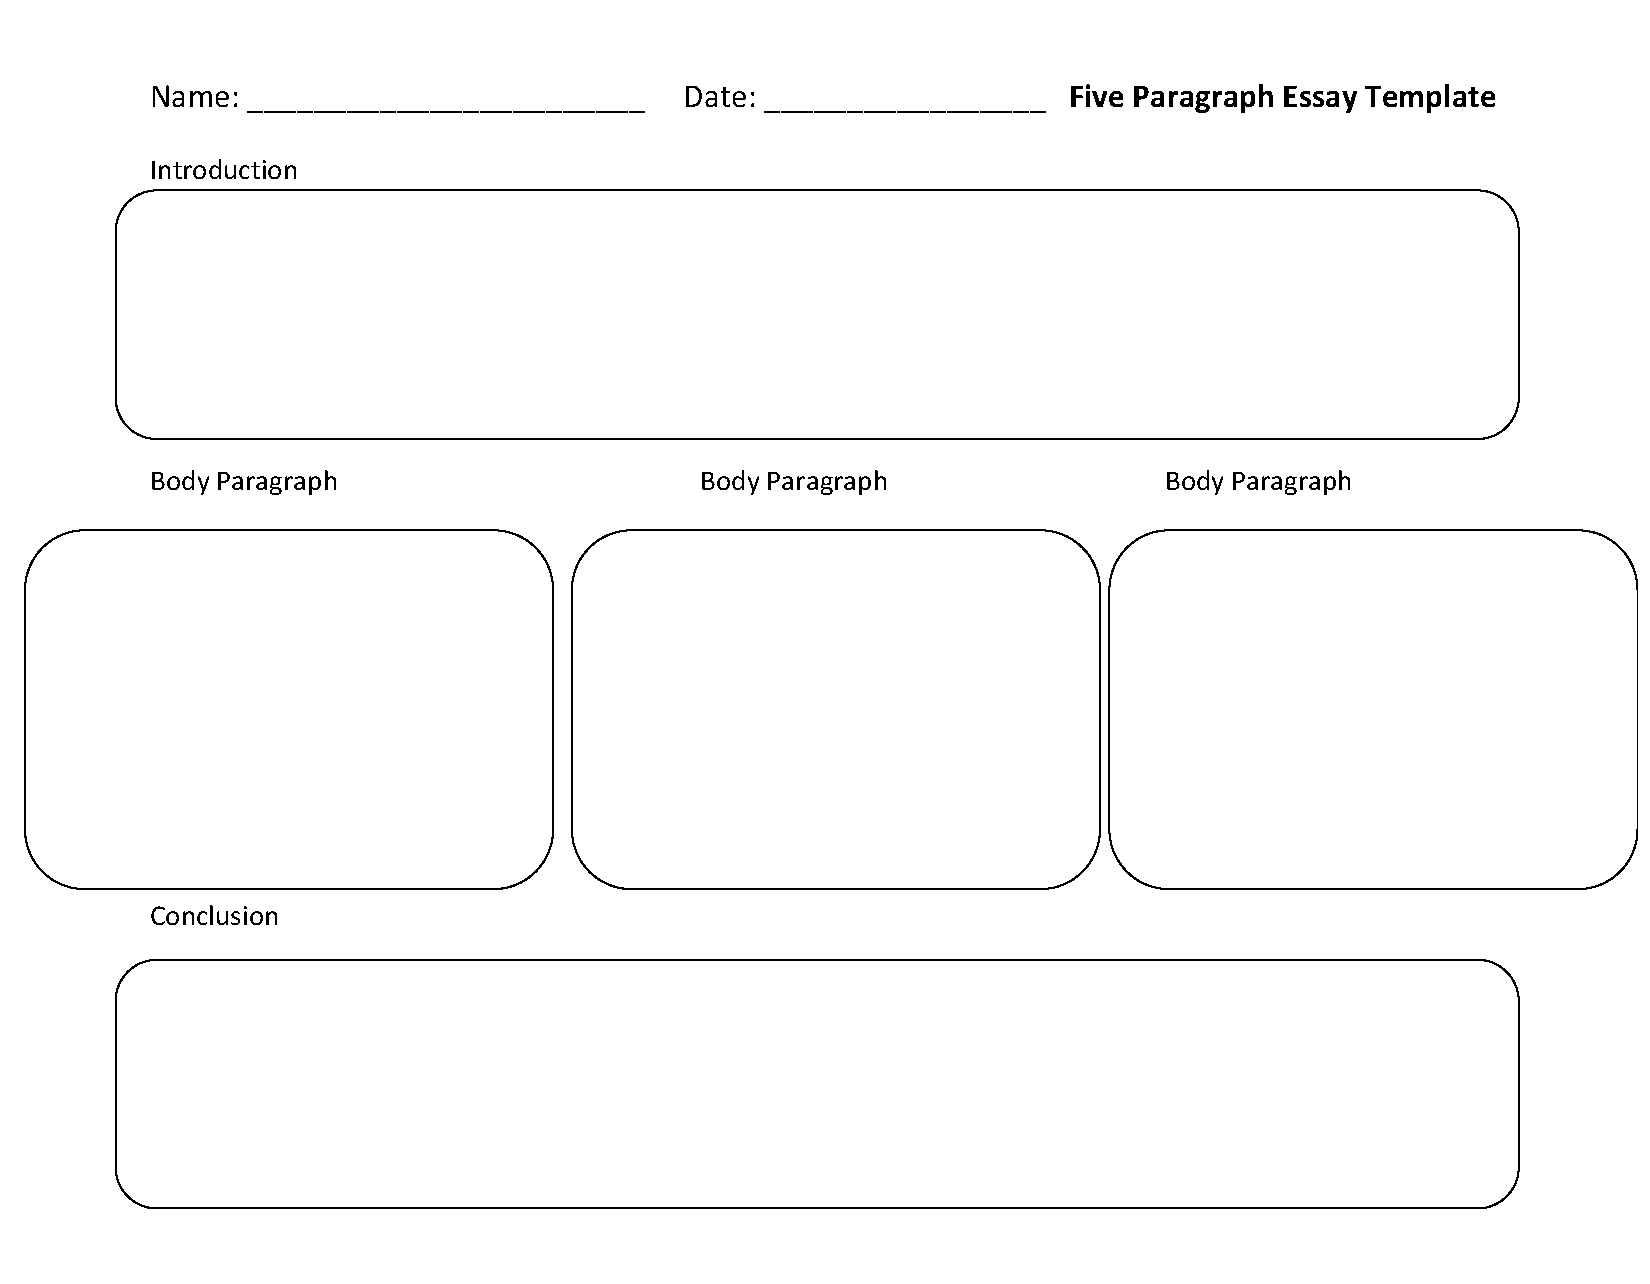 Five Paragraph Essay: Full Guide With Examples | blogger.com